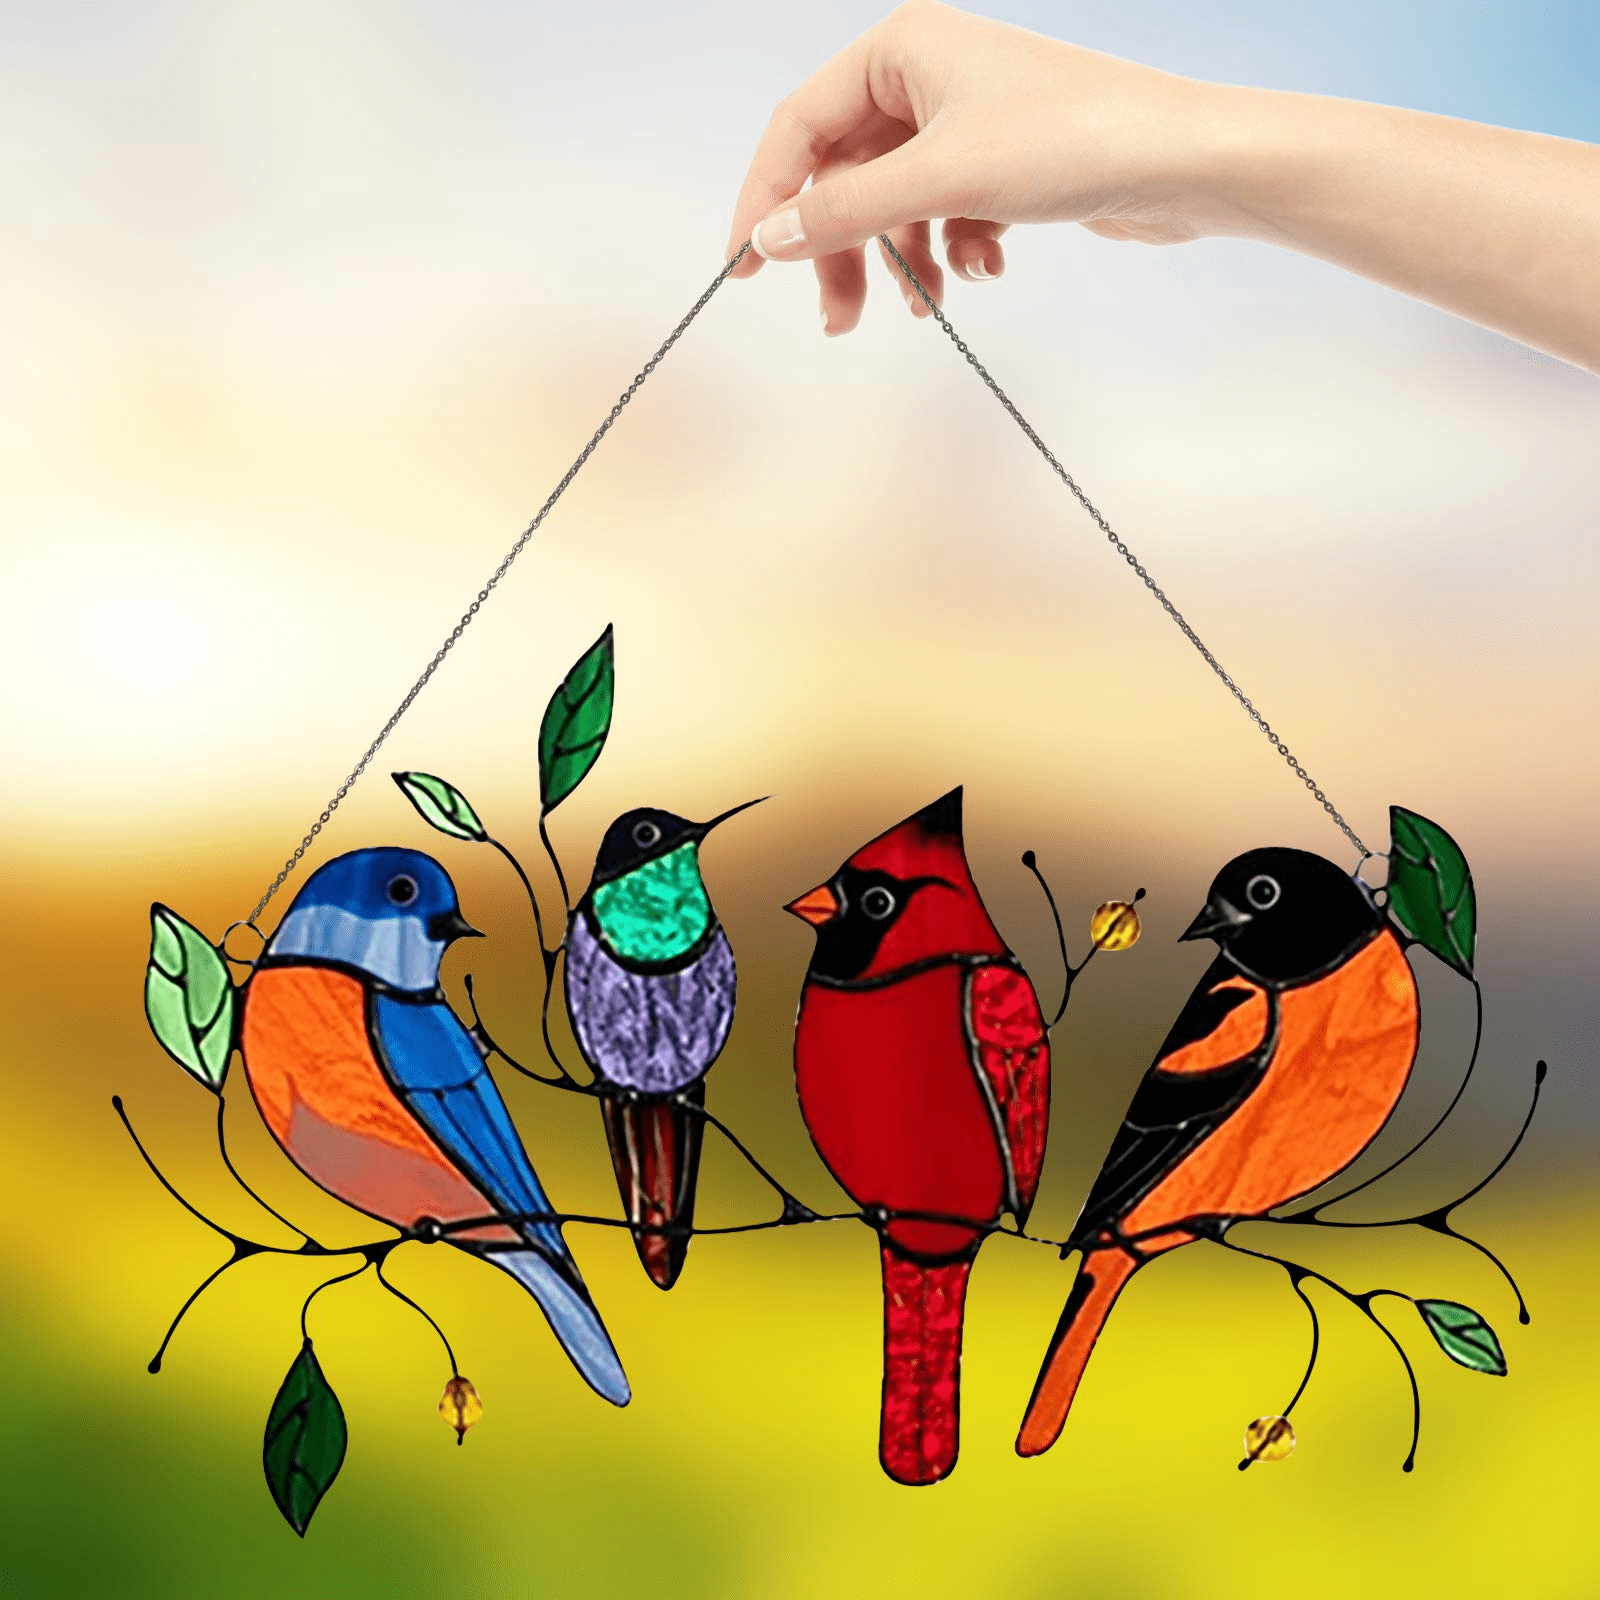 Stained Glass Window Hangings Multicolor Birds on a Wire High Stained Glass  Suncatcher Window Panel, Stained Bird Window Hanging Suncatcher, Ornaments  